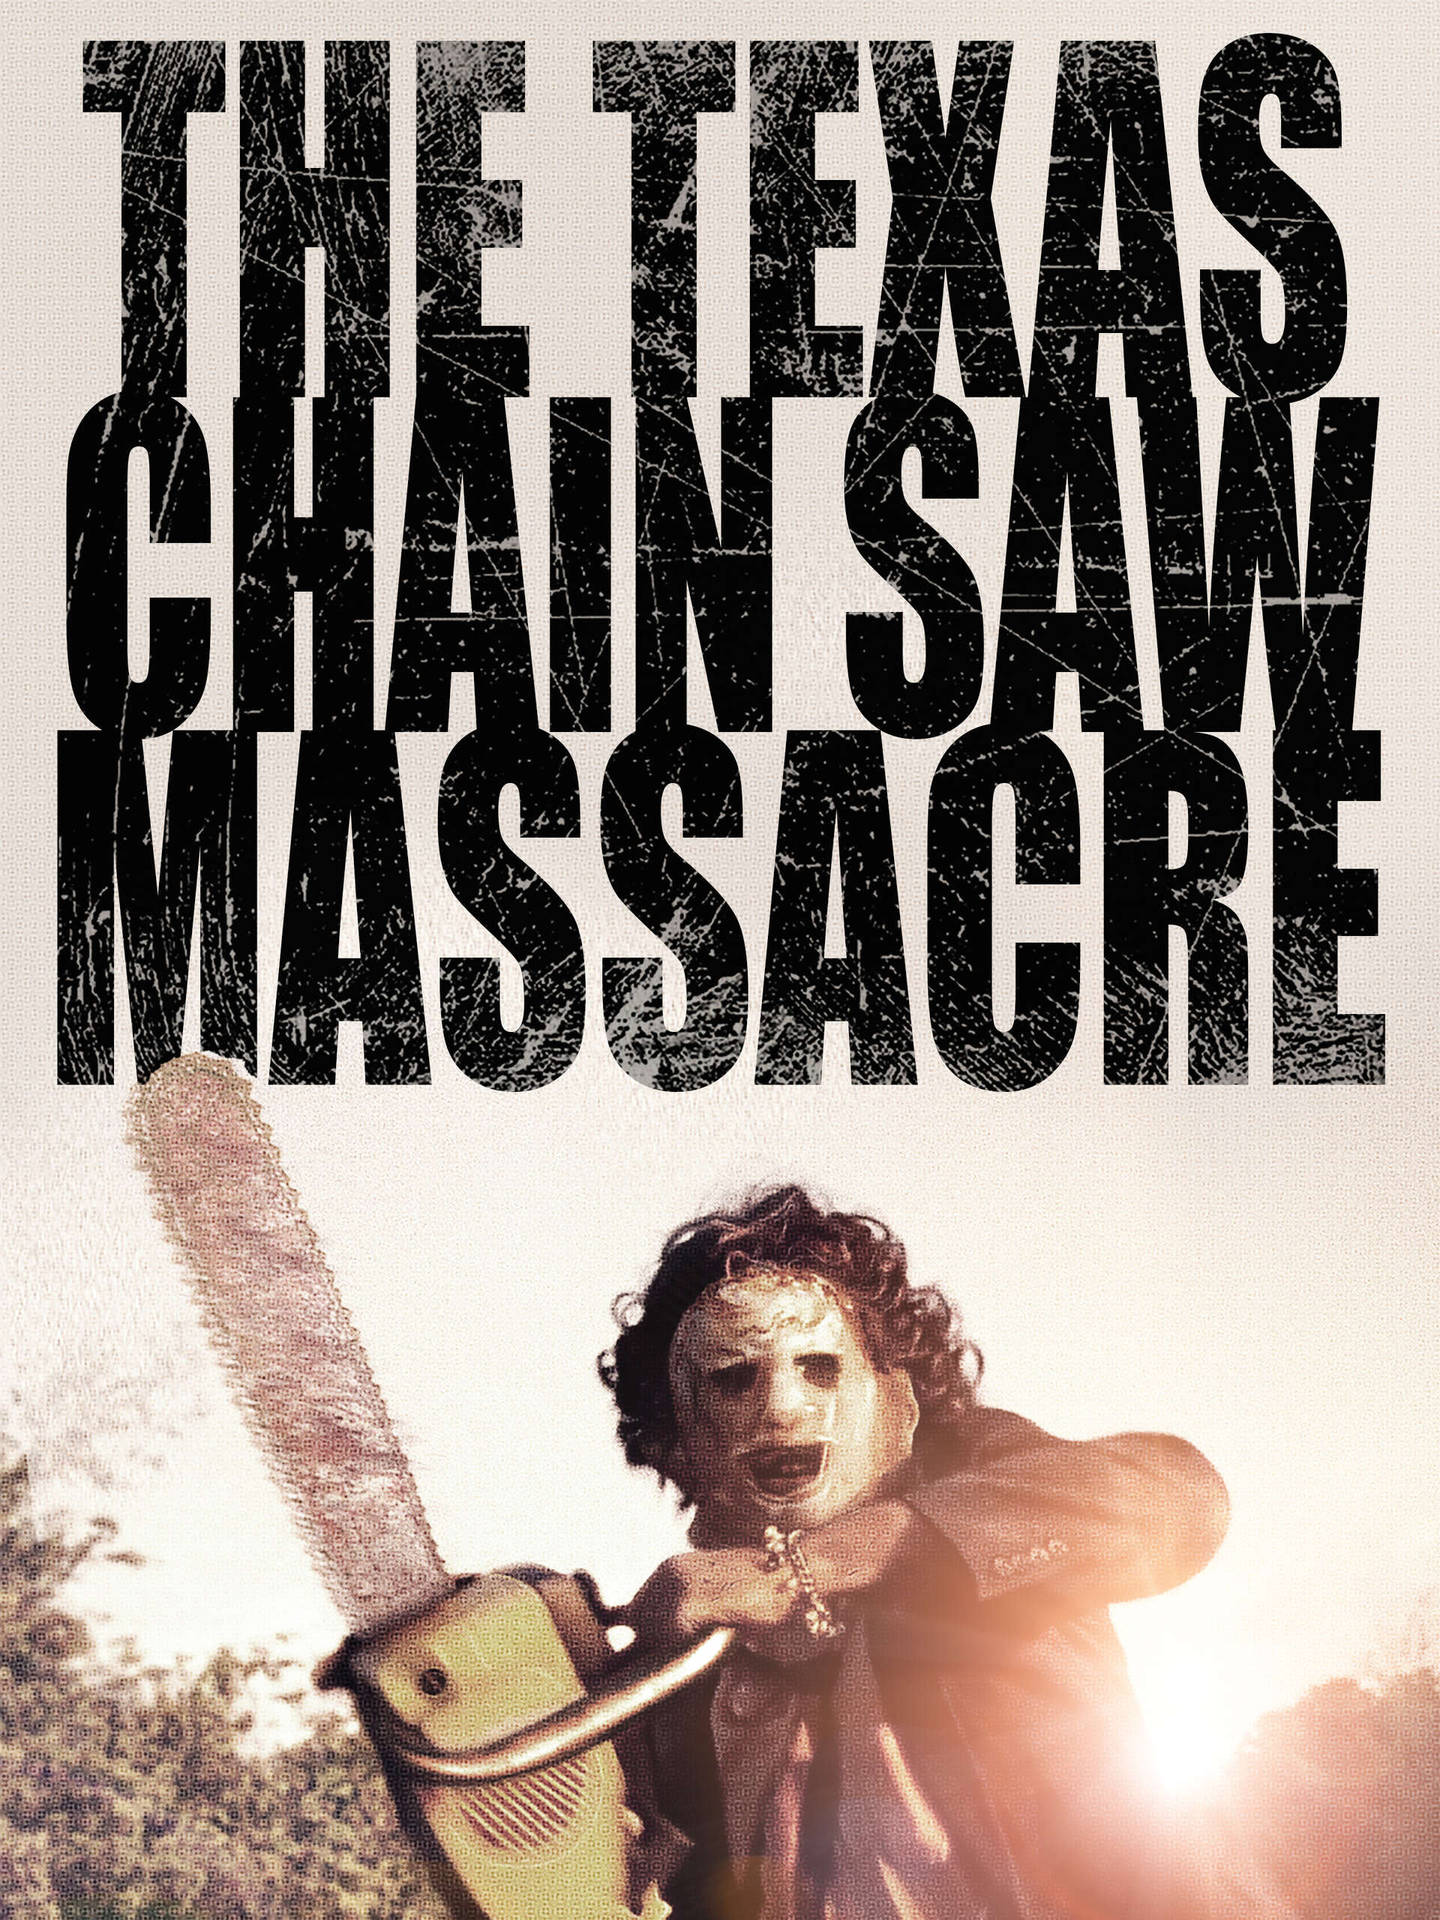 Leatherface Texas Chainsaw Massacre Poster Background